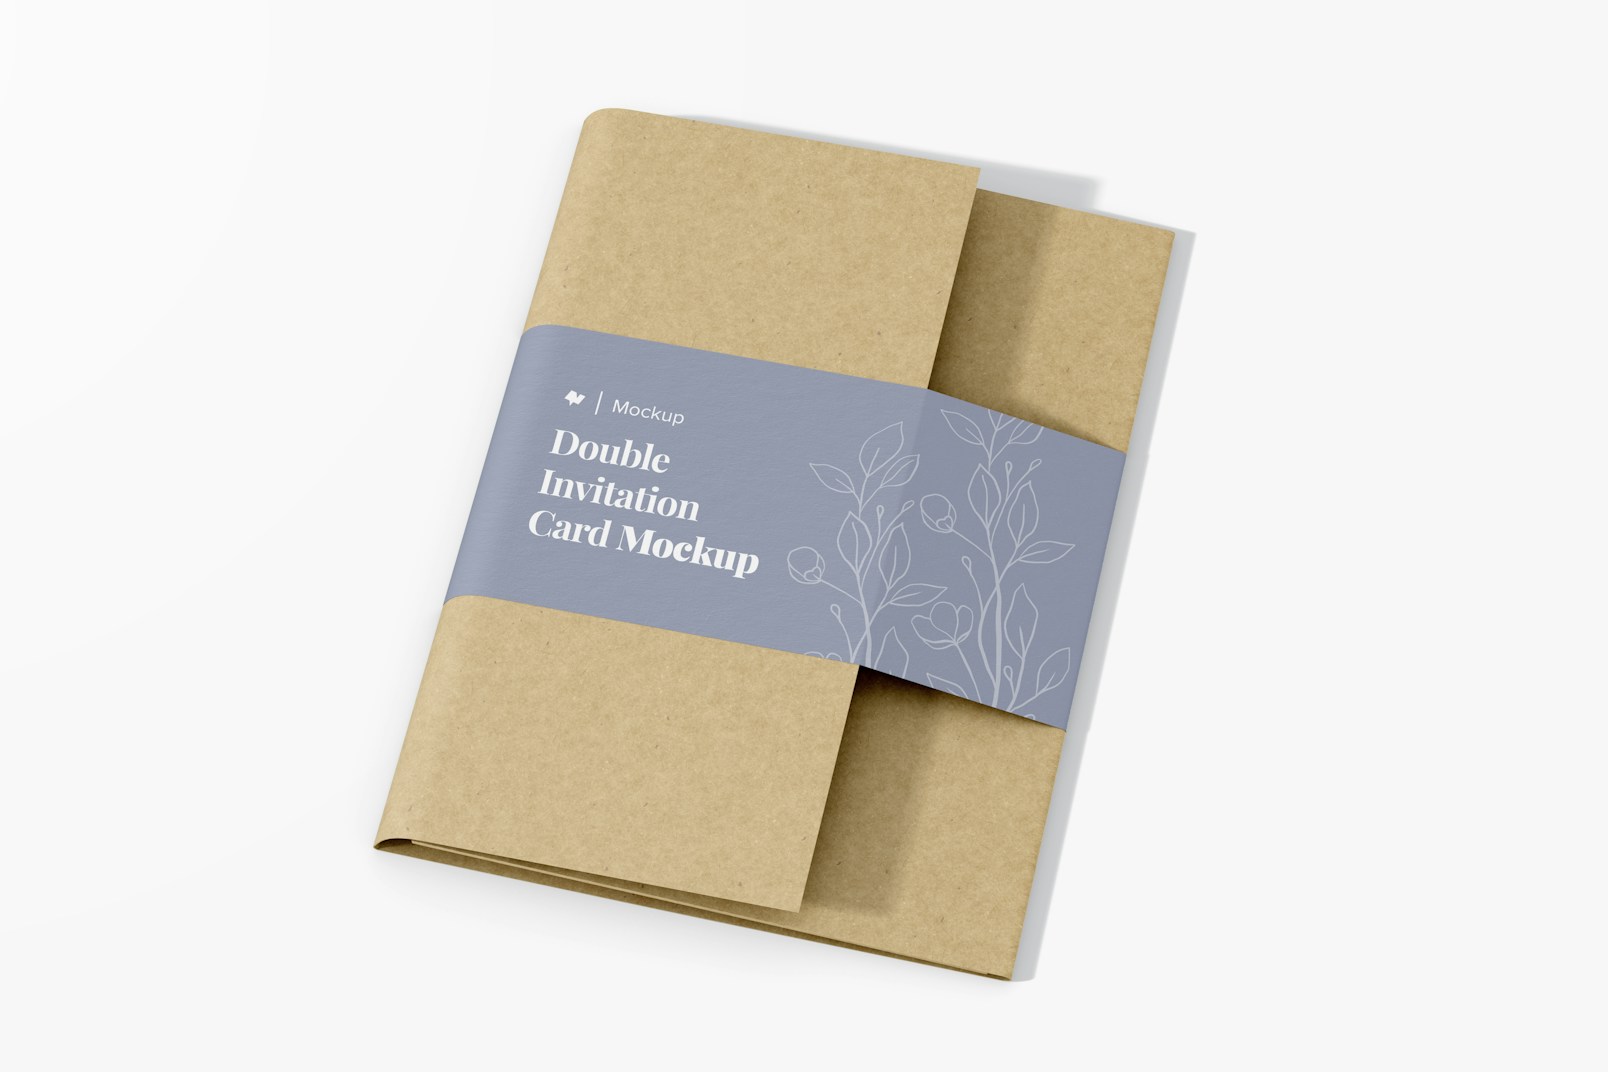 Double Invitation Card Mockup, Top View